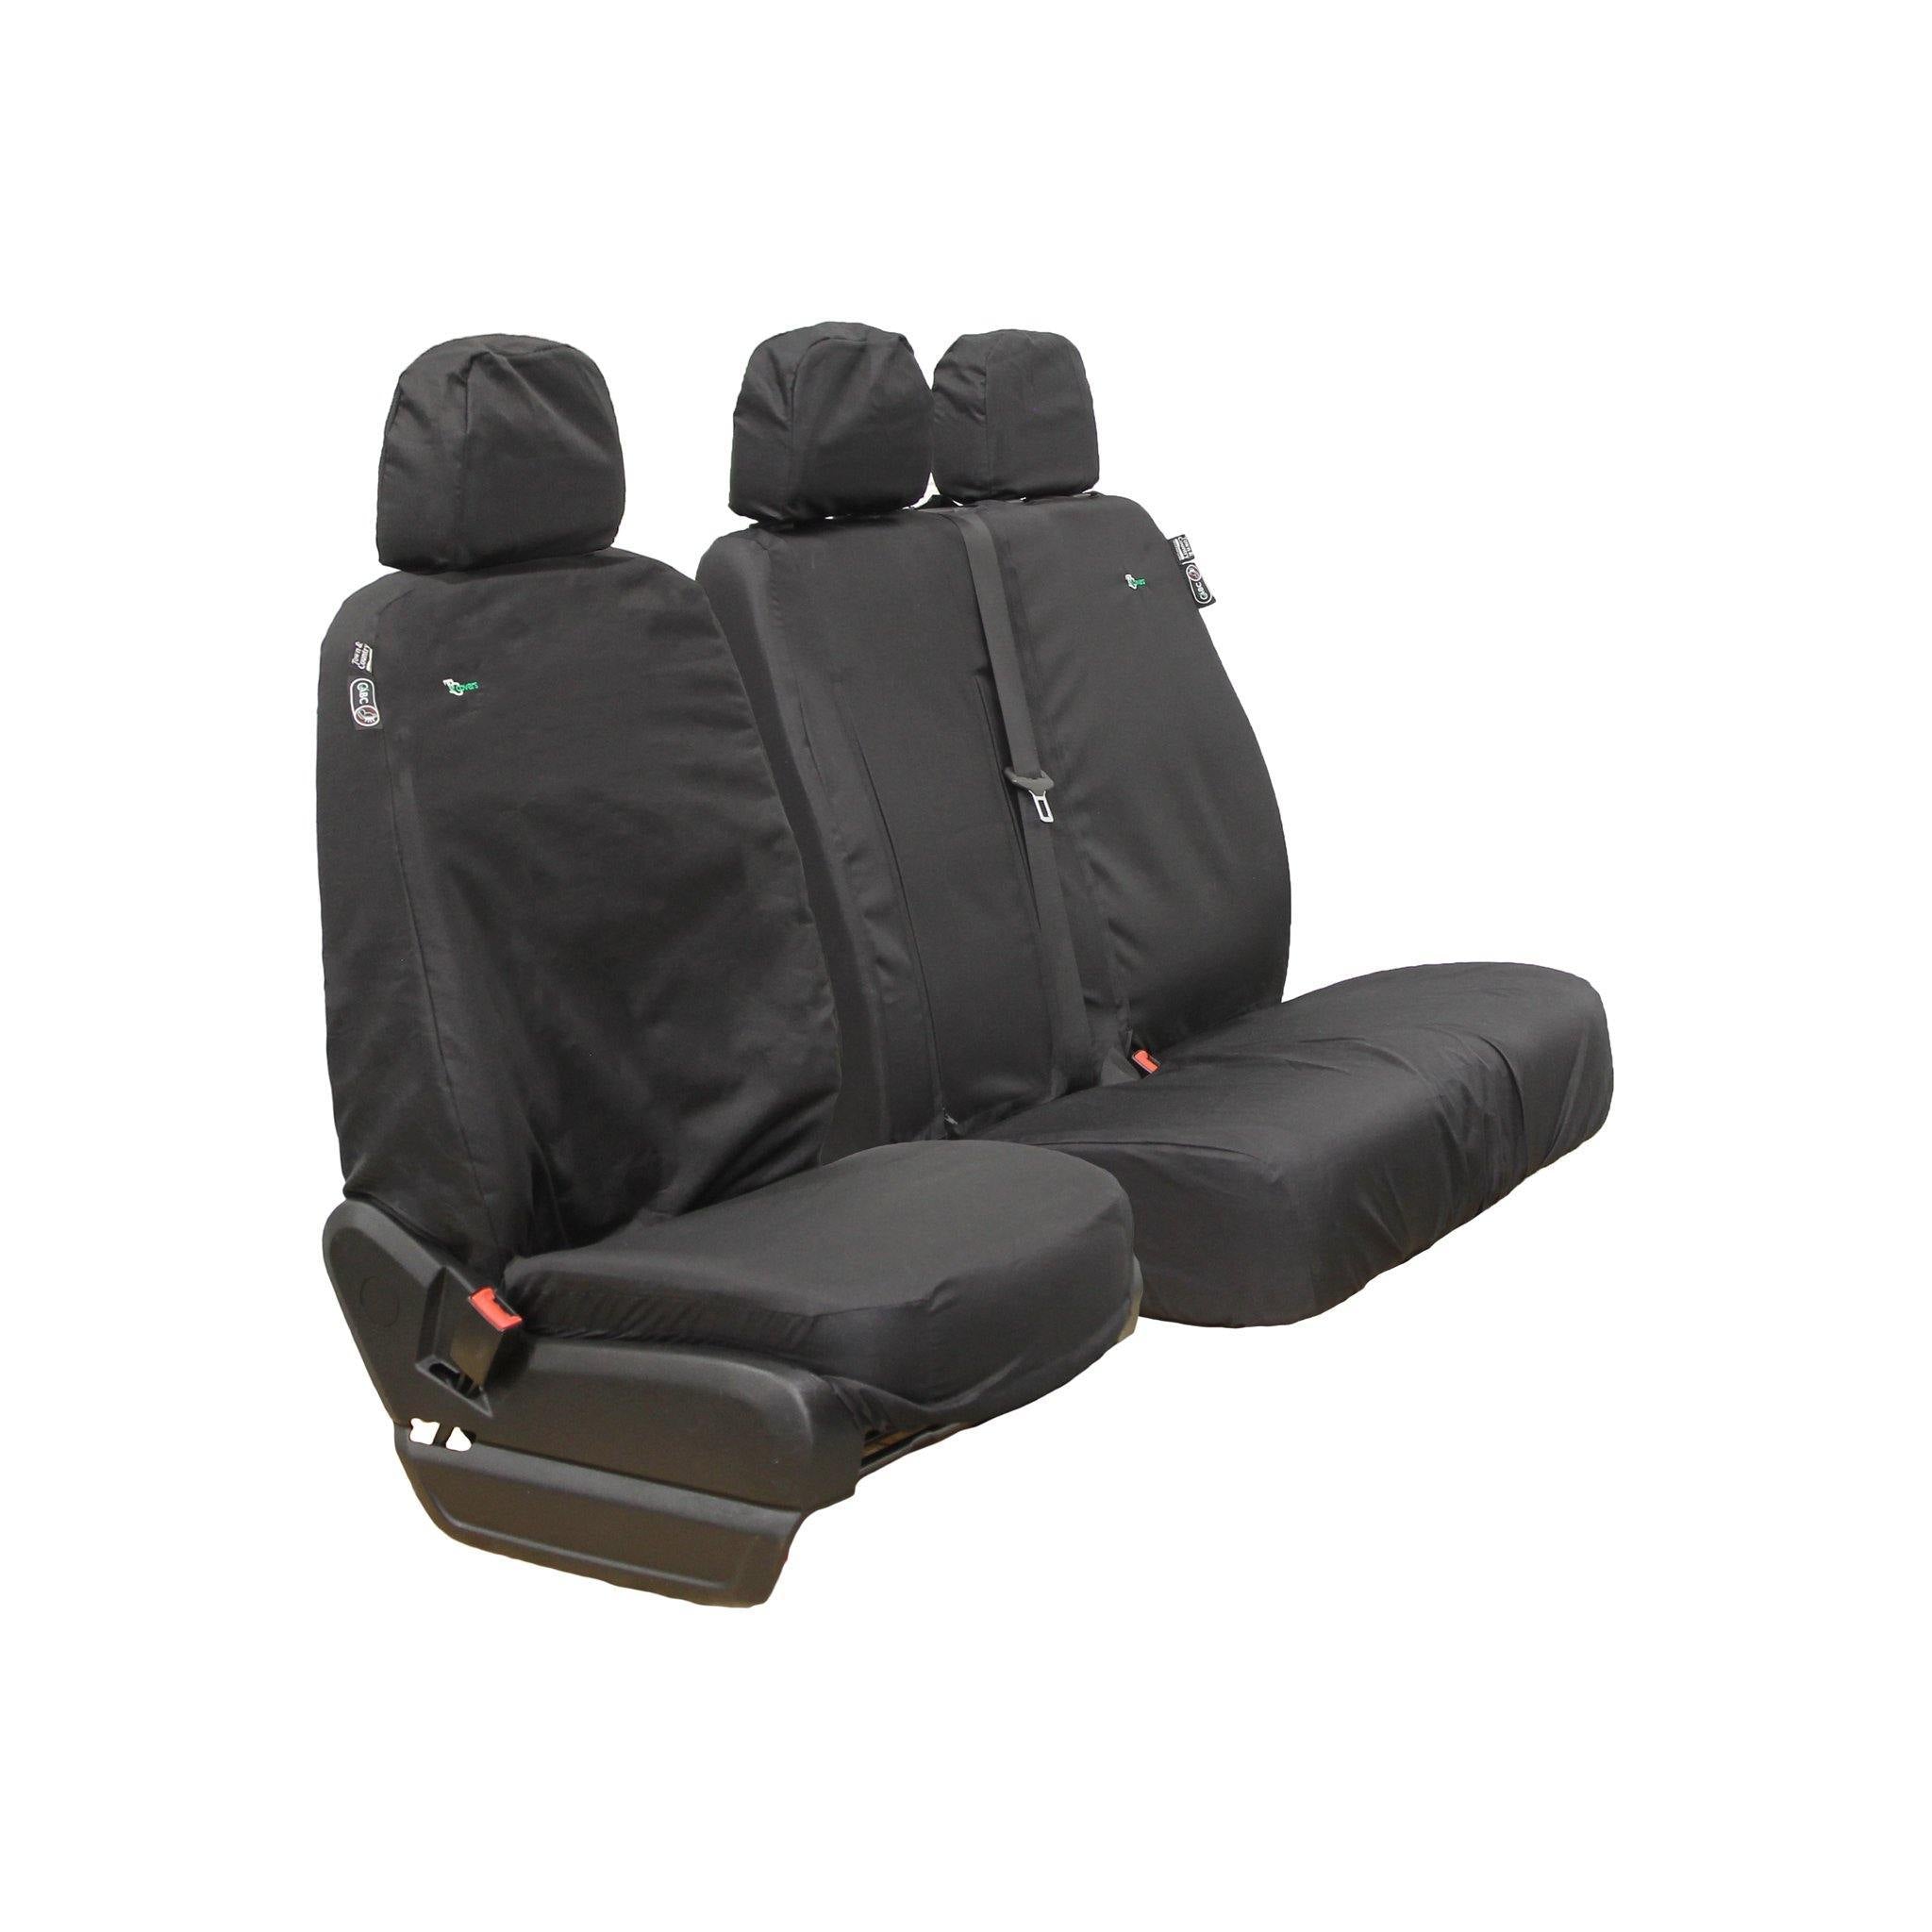 Isuzu D-Max Seat Covers – Heavy Duty | Town & Country